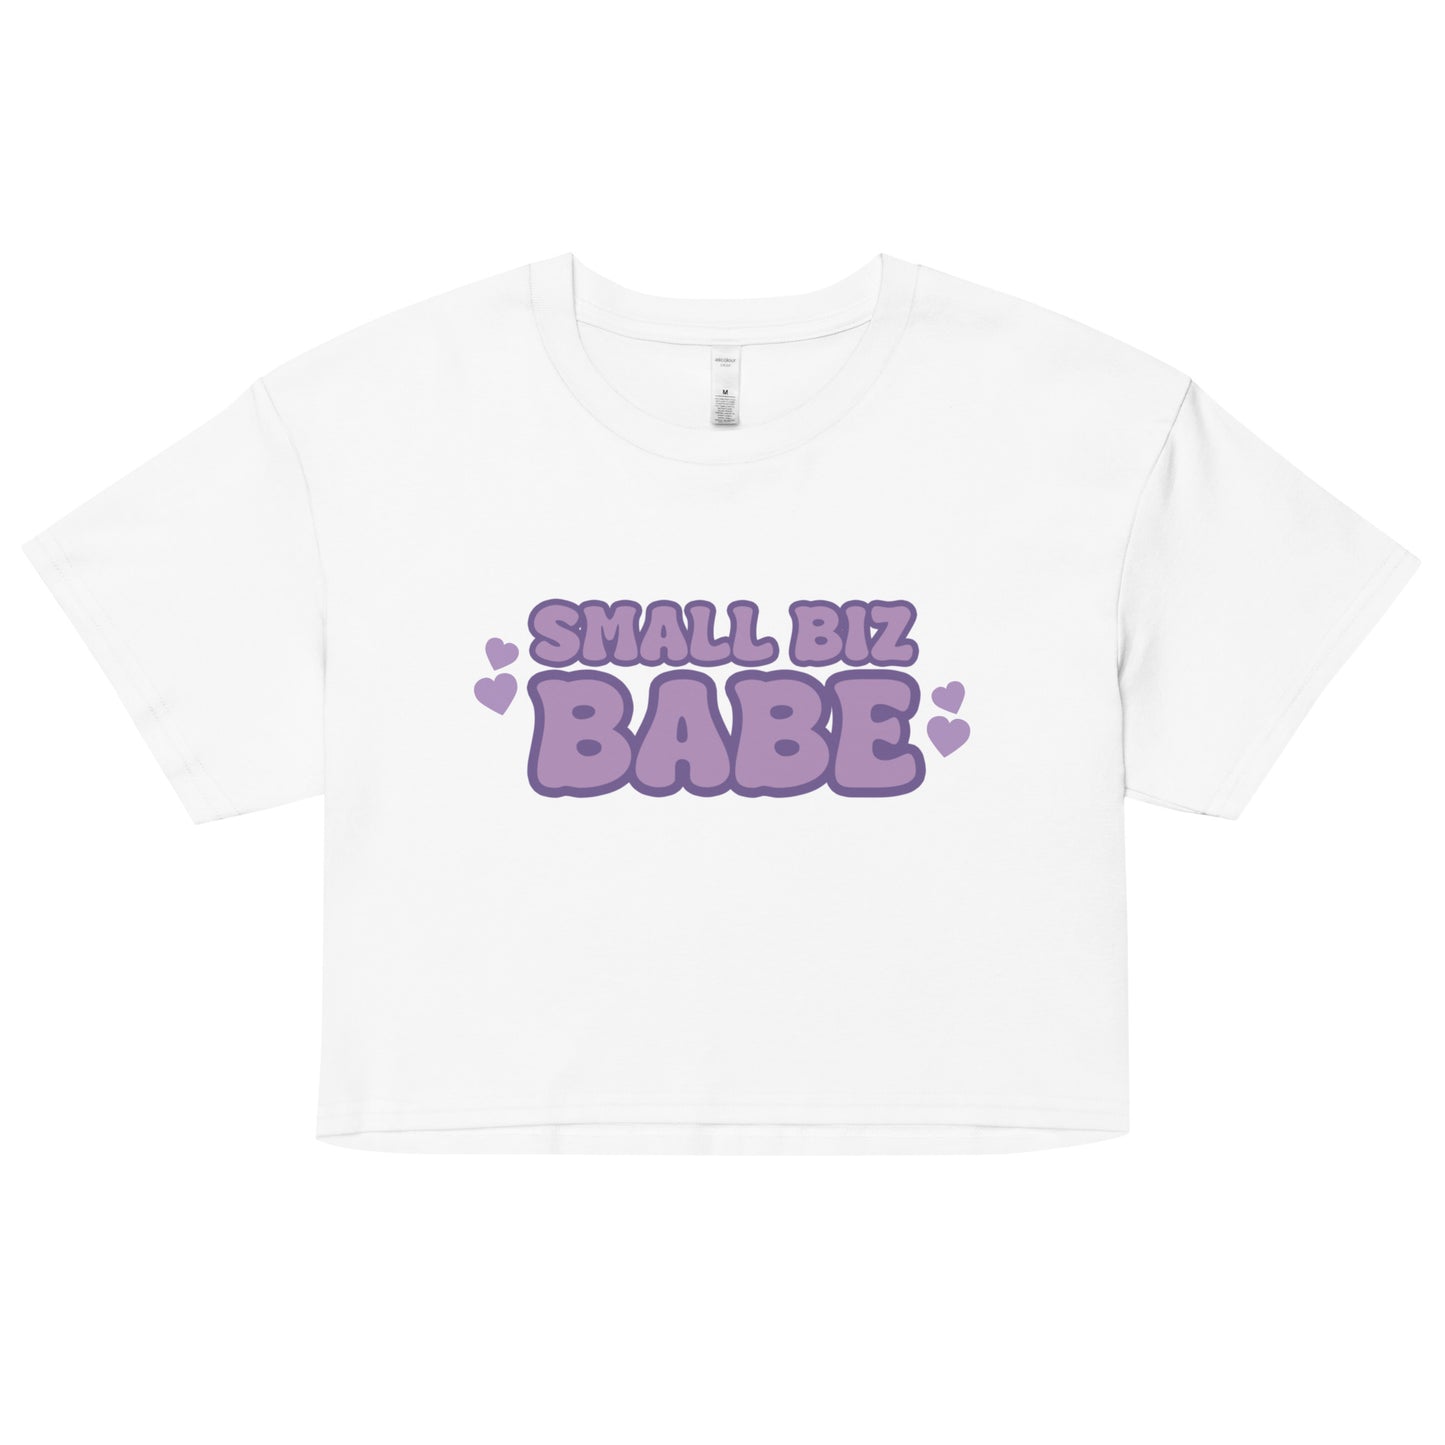 Small Biz Babe | Women’s Crop Top | Relaxed Fit